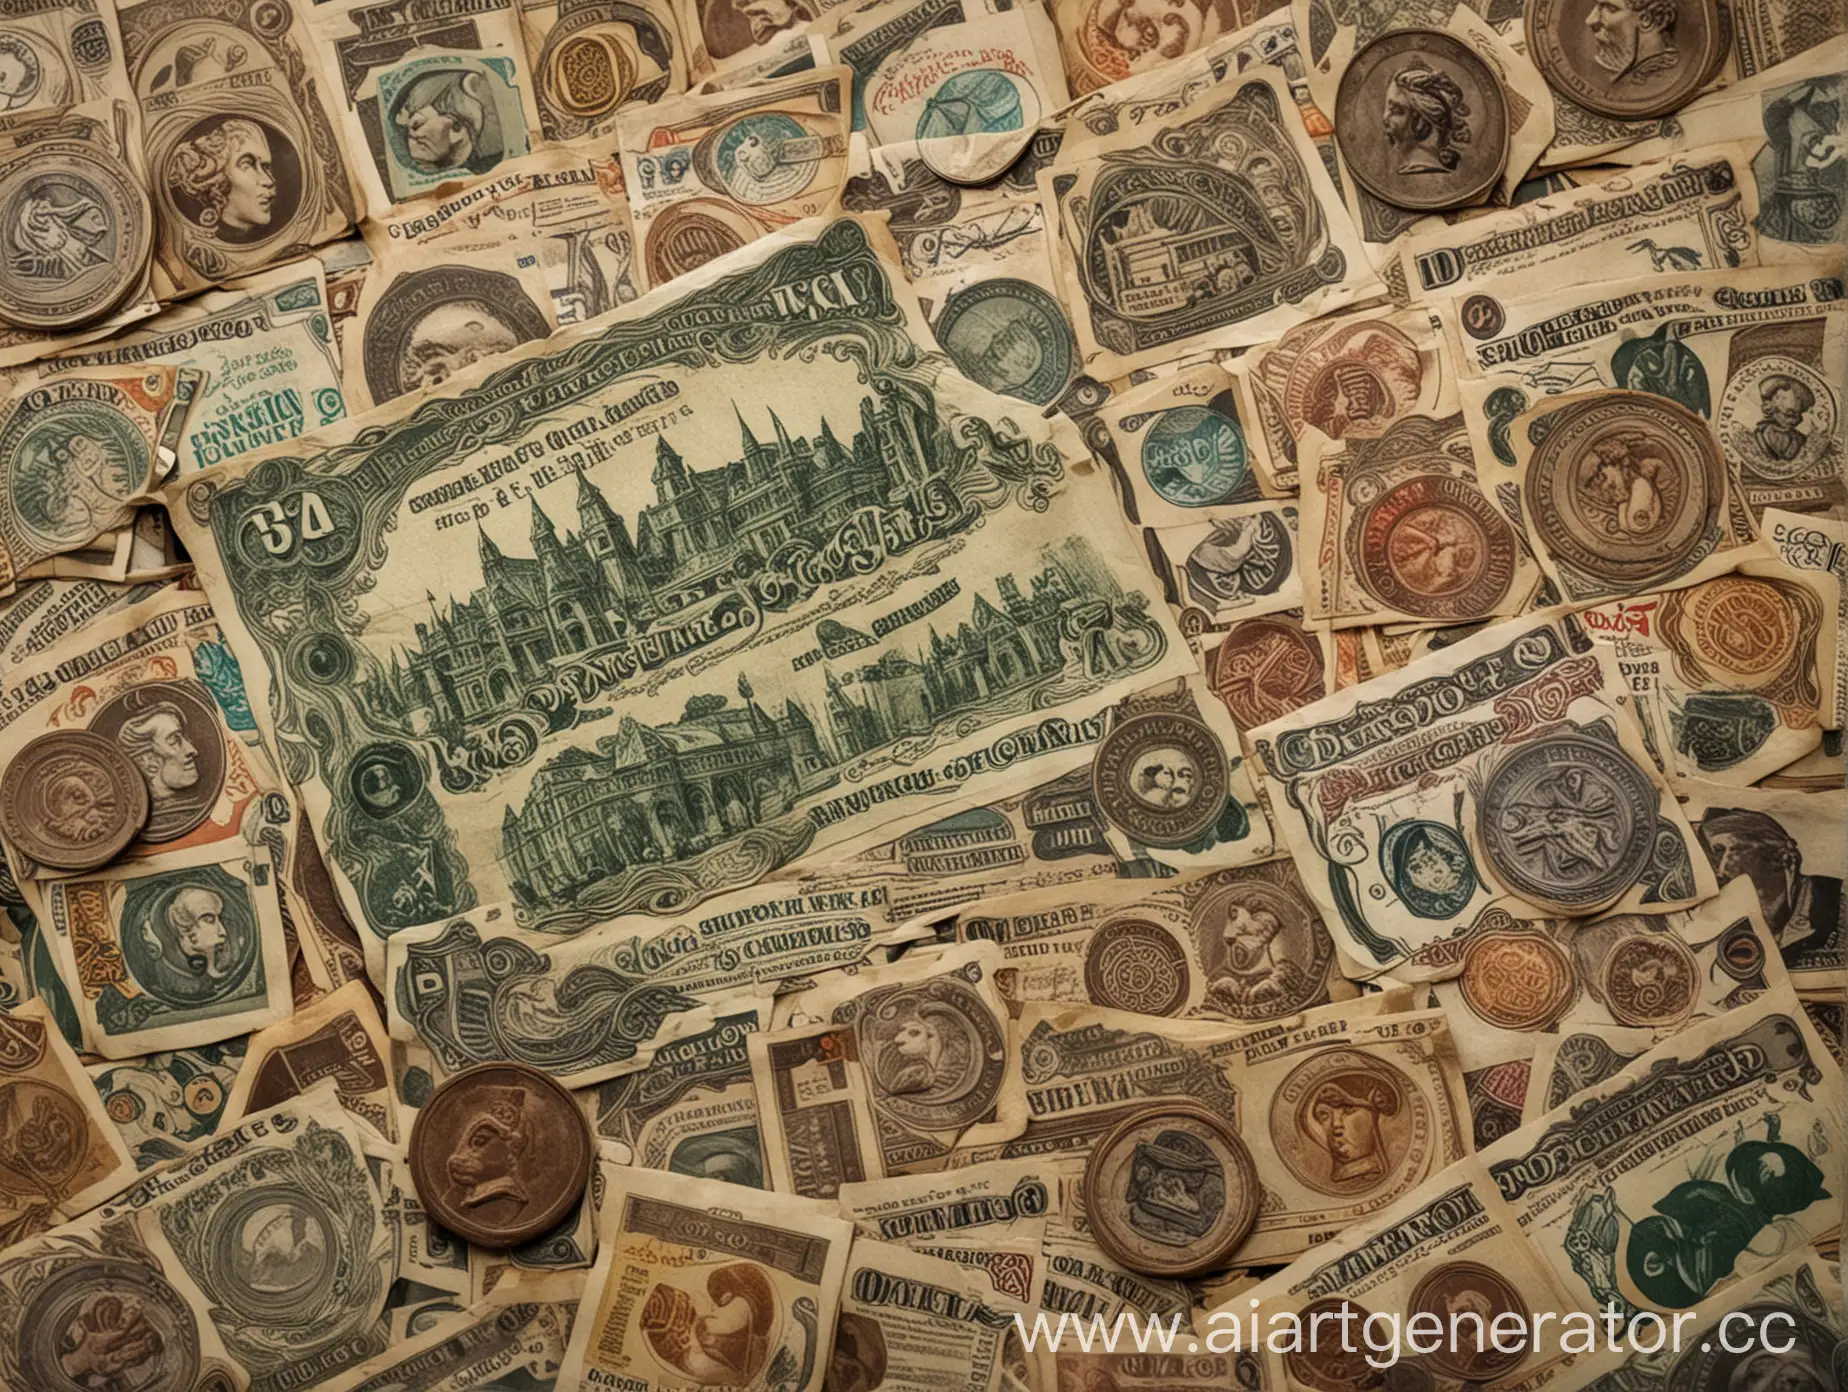 Exhibition-of-Rare-Banknotes-and-Coins-at-the-Museum